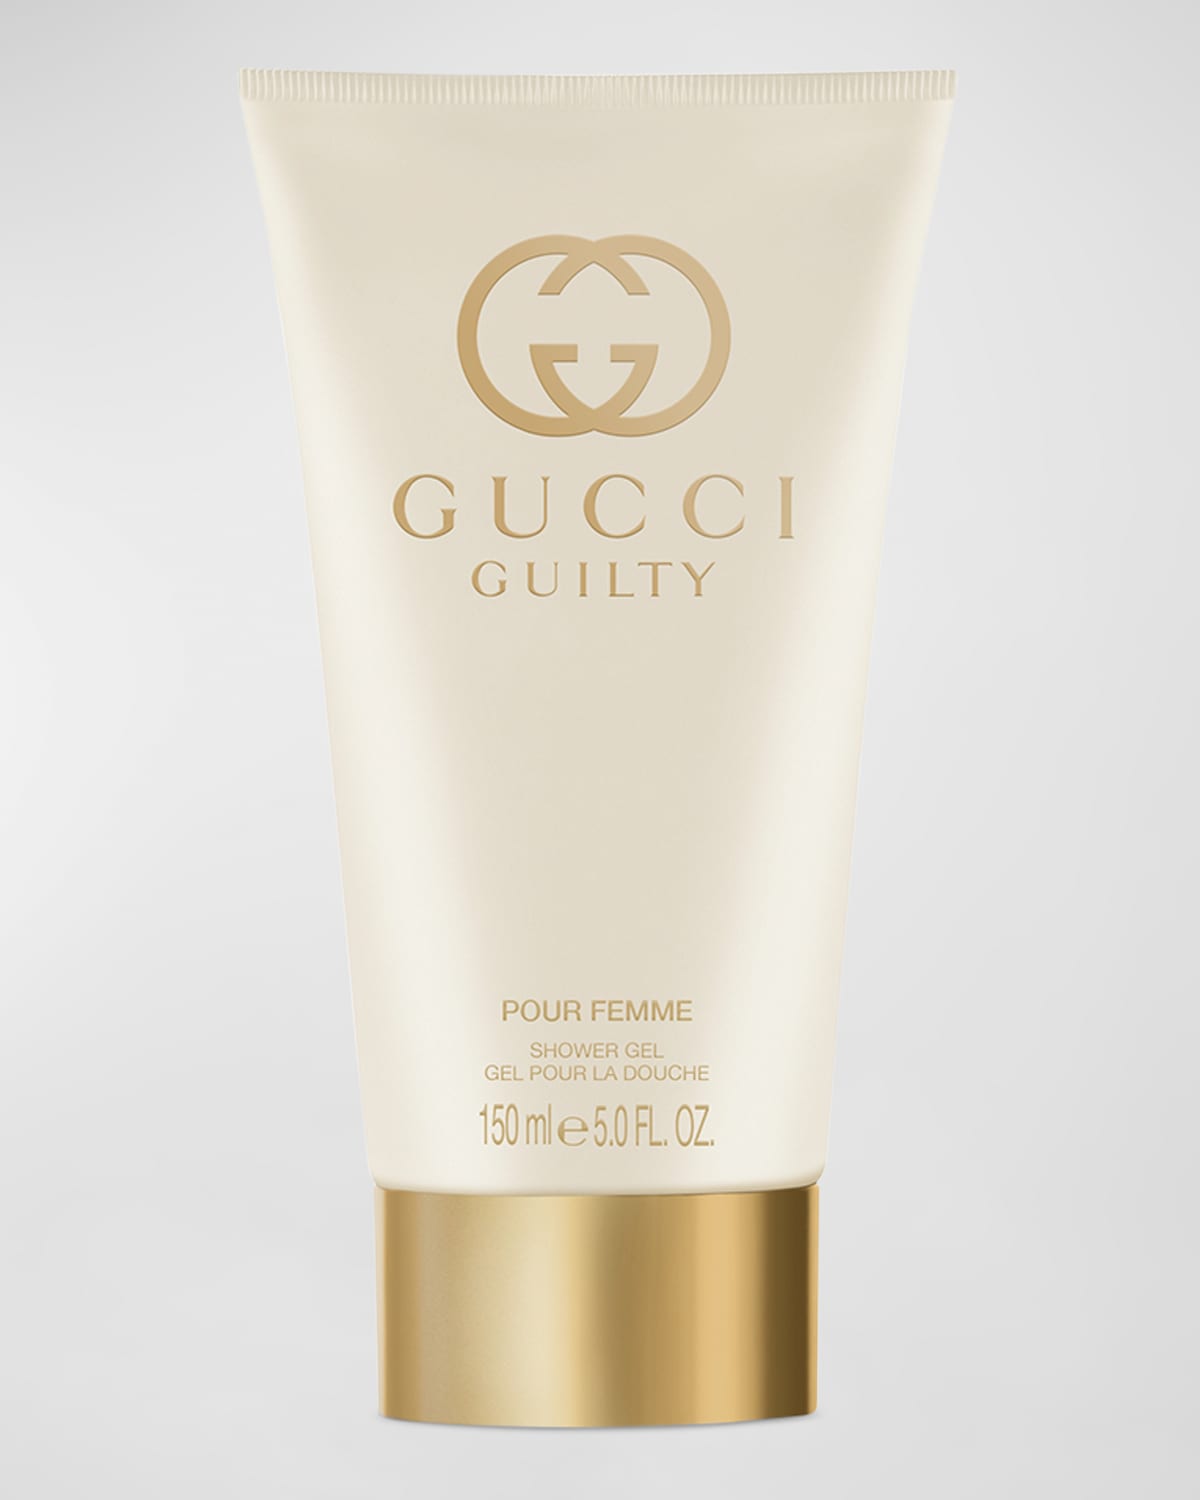 Gucci Guilty Shower Gel For Her, 5 Oz.